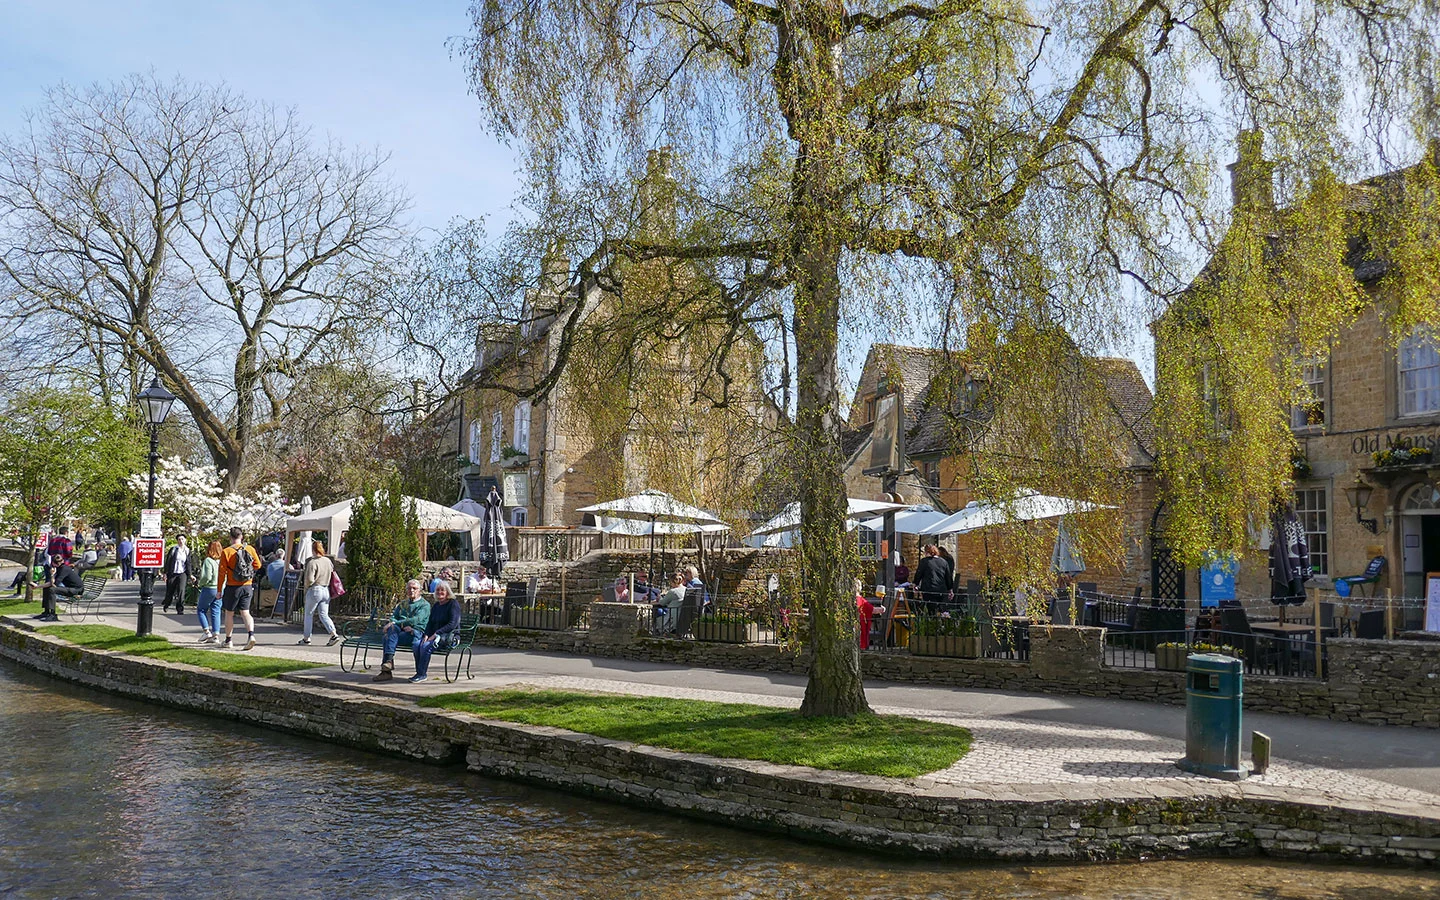 By the River Windrush in Bourton-on-the-Water